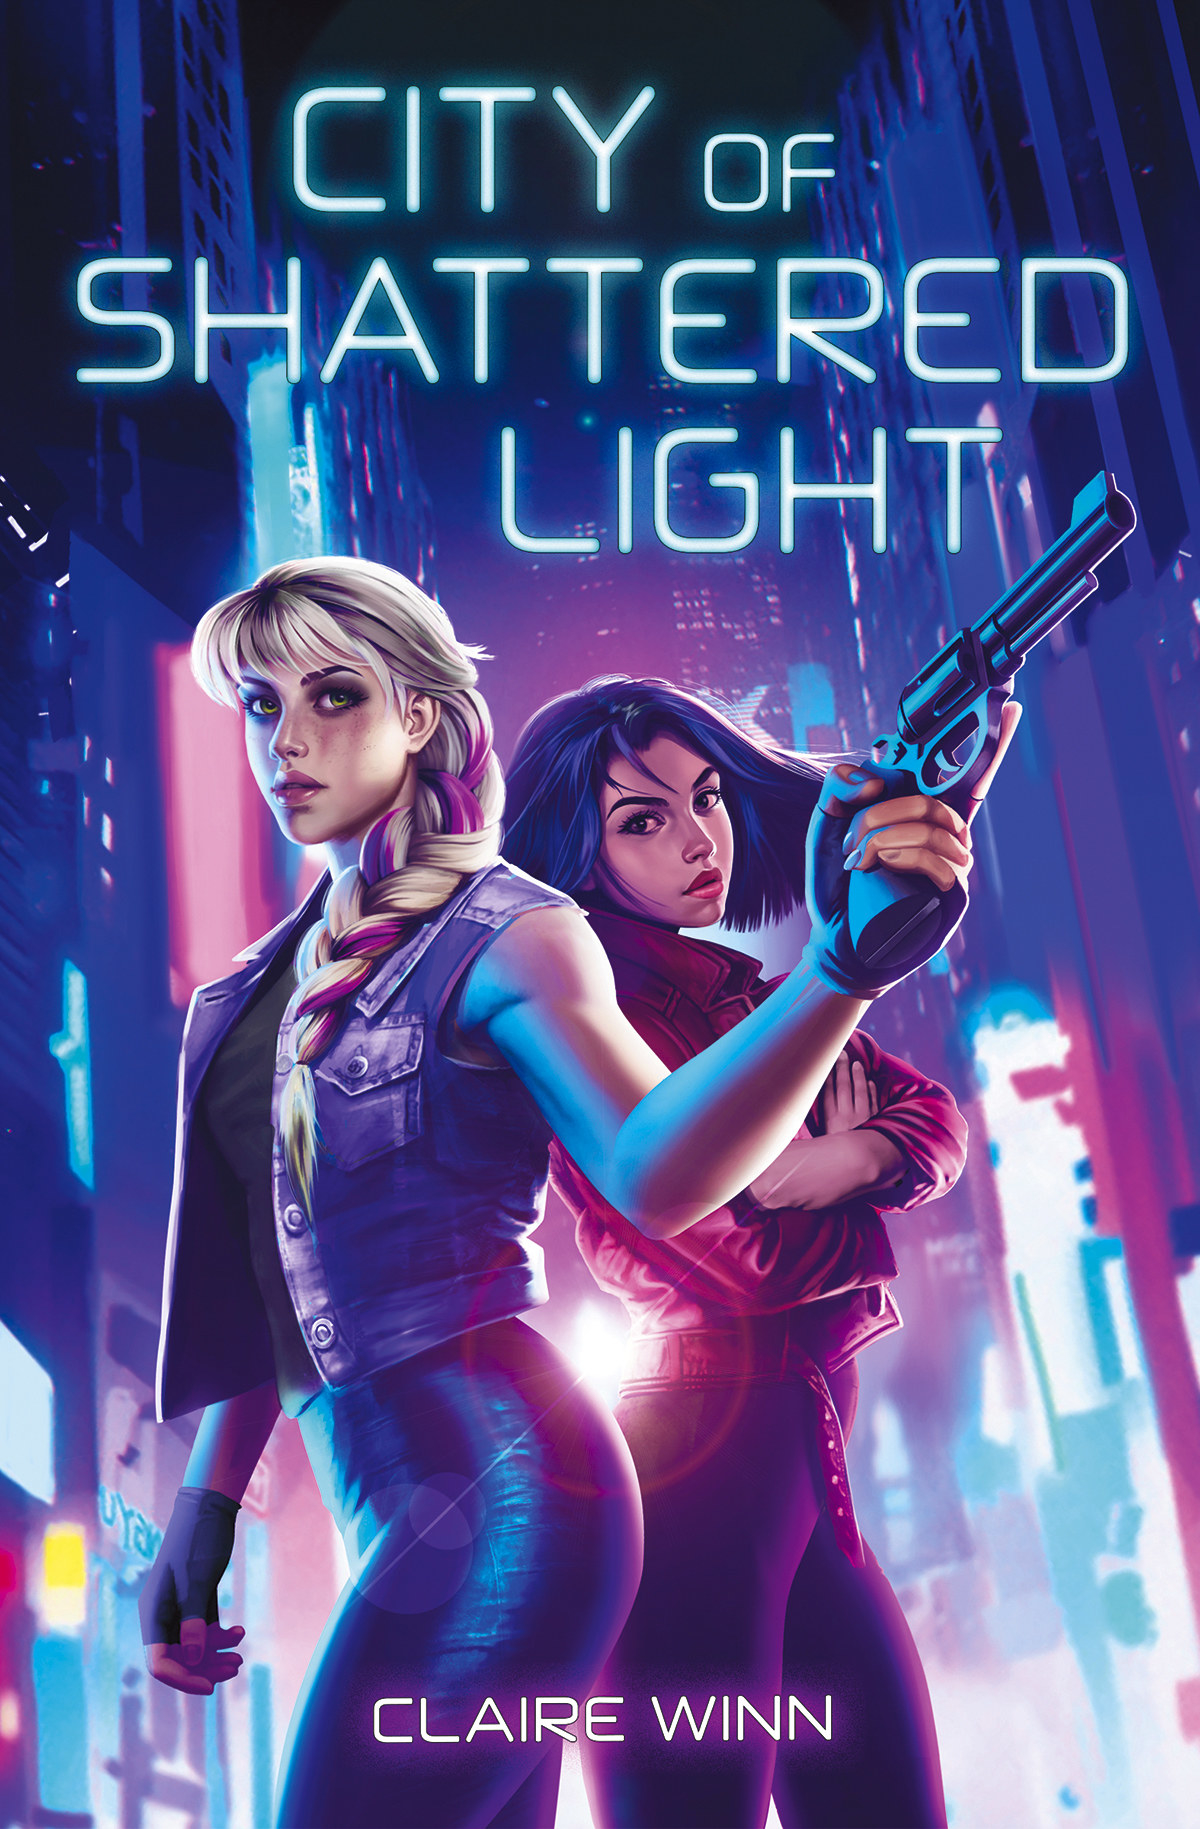 A blonde girl with a braid, fingerless gloves and sleeveless vest holds a gun in front of a girl with cropped blue hair, standing before city lights